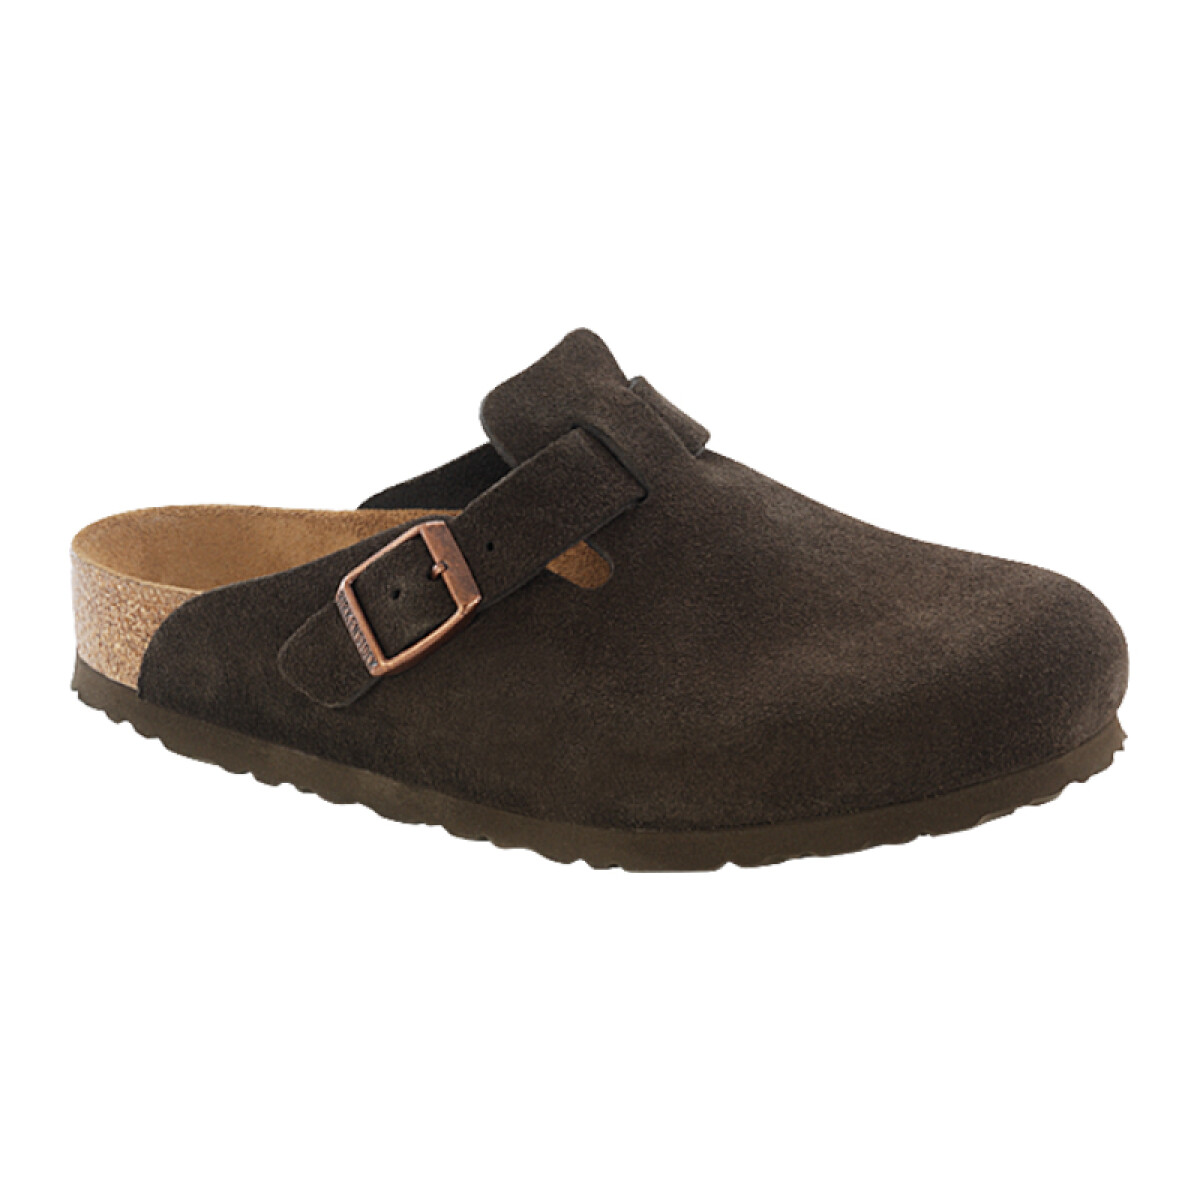 Zueco Boston Soft Footbed Suede Leather - Regular - Mocca 